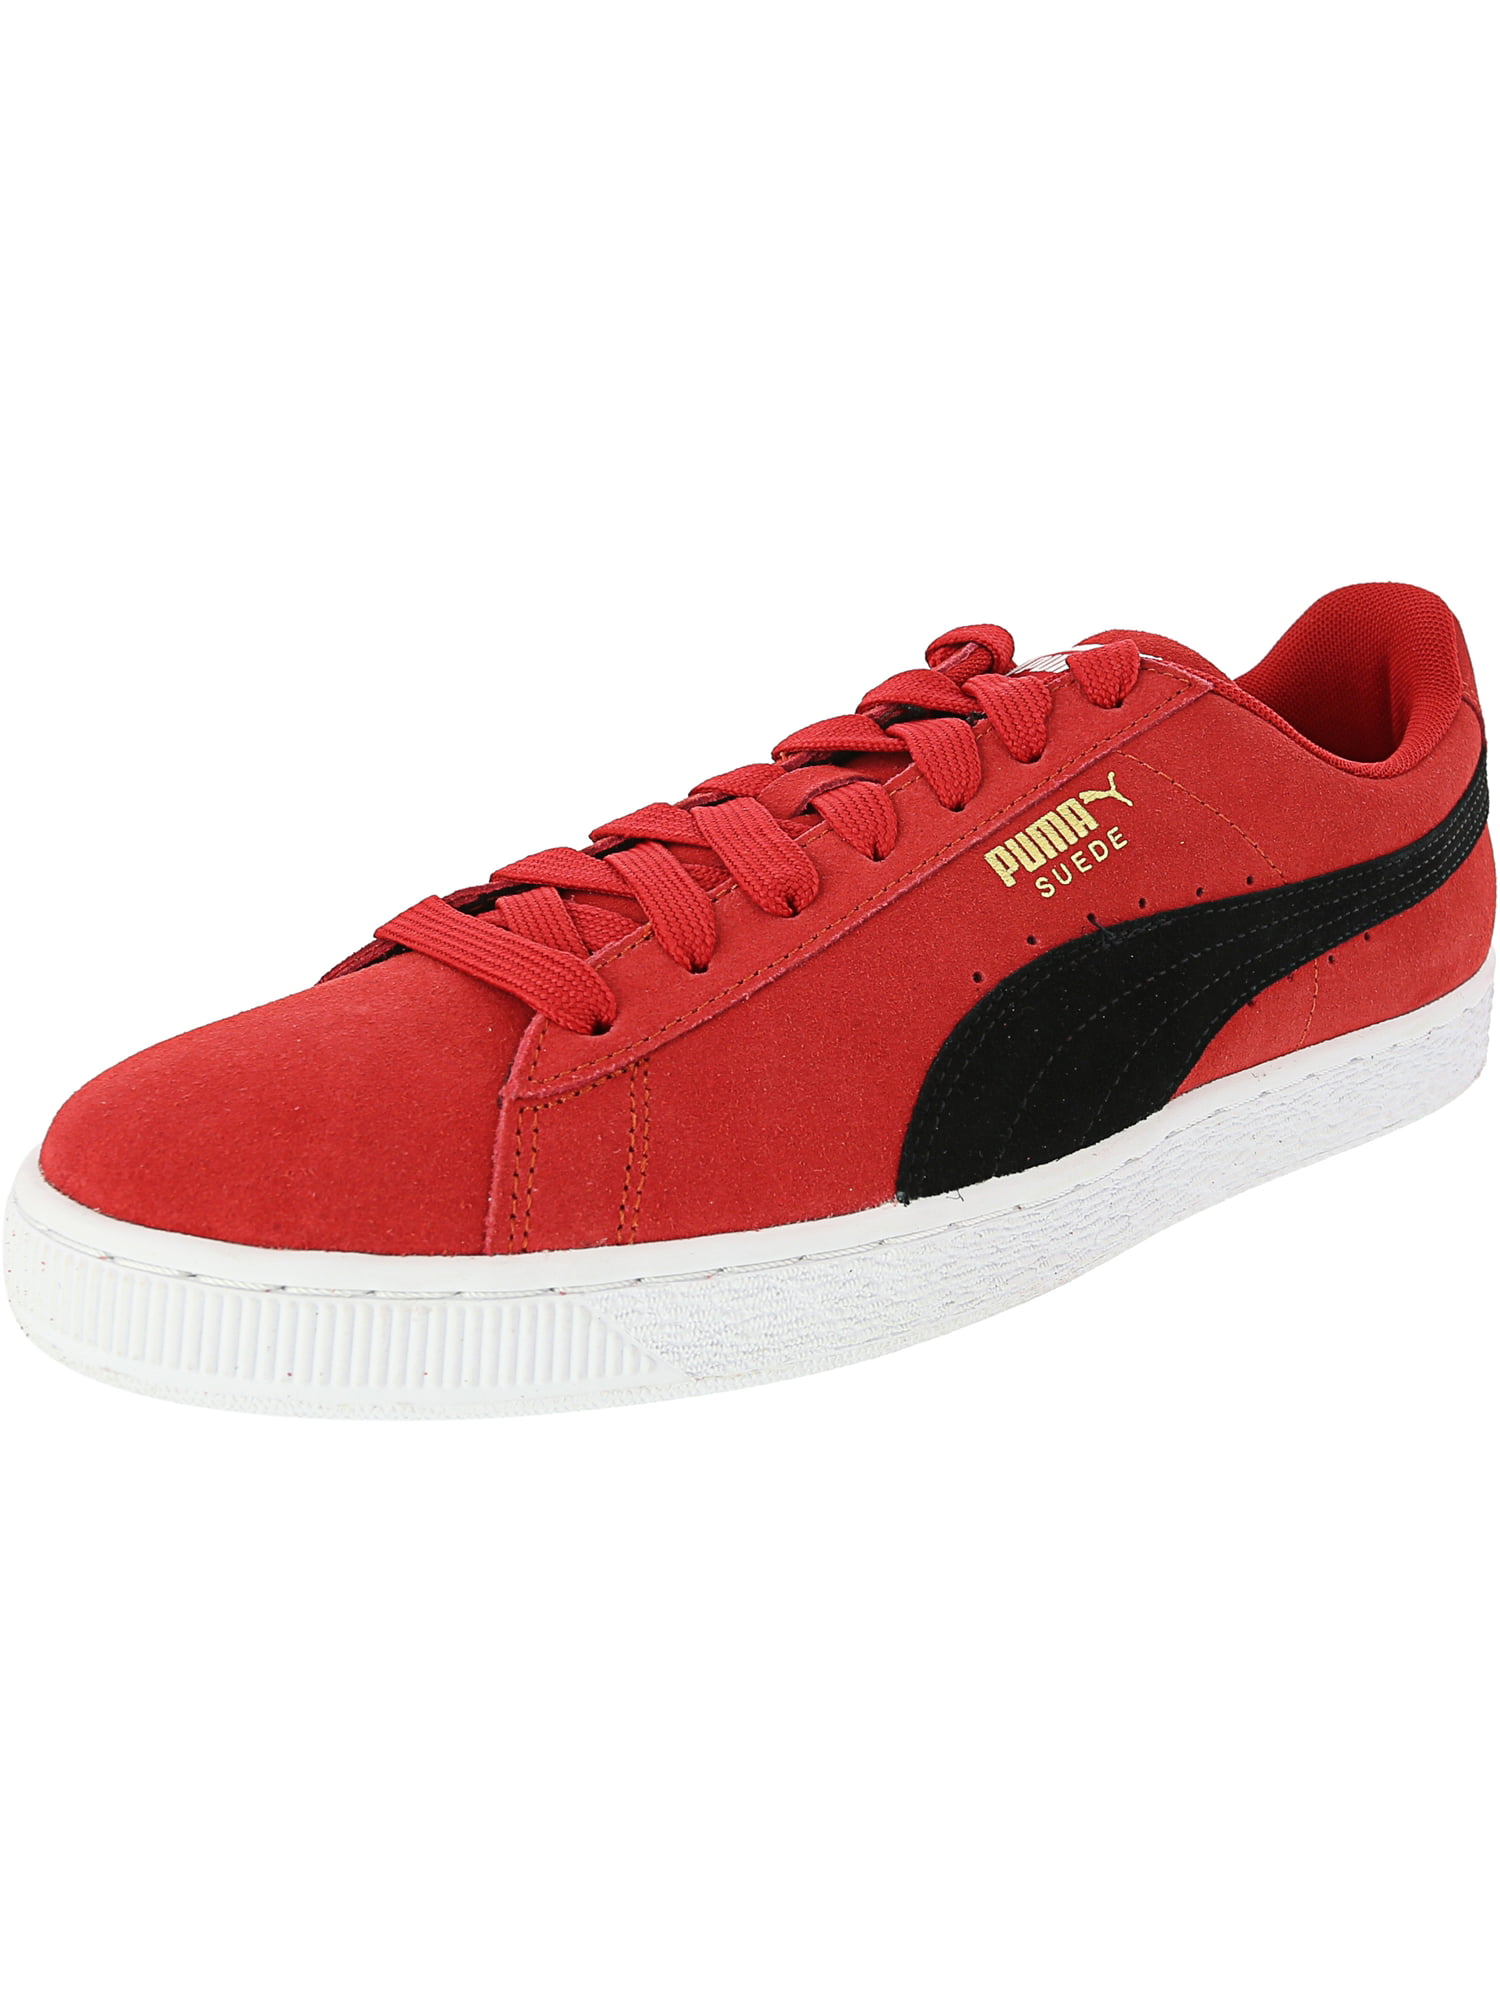 puma red high ankle